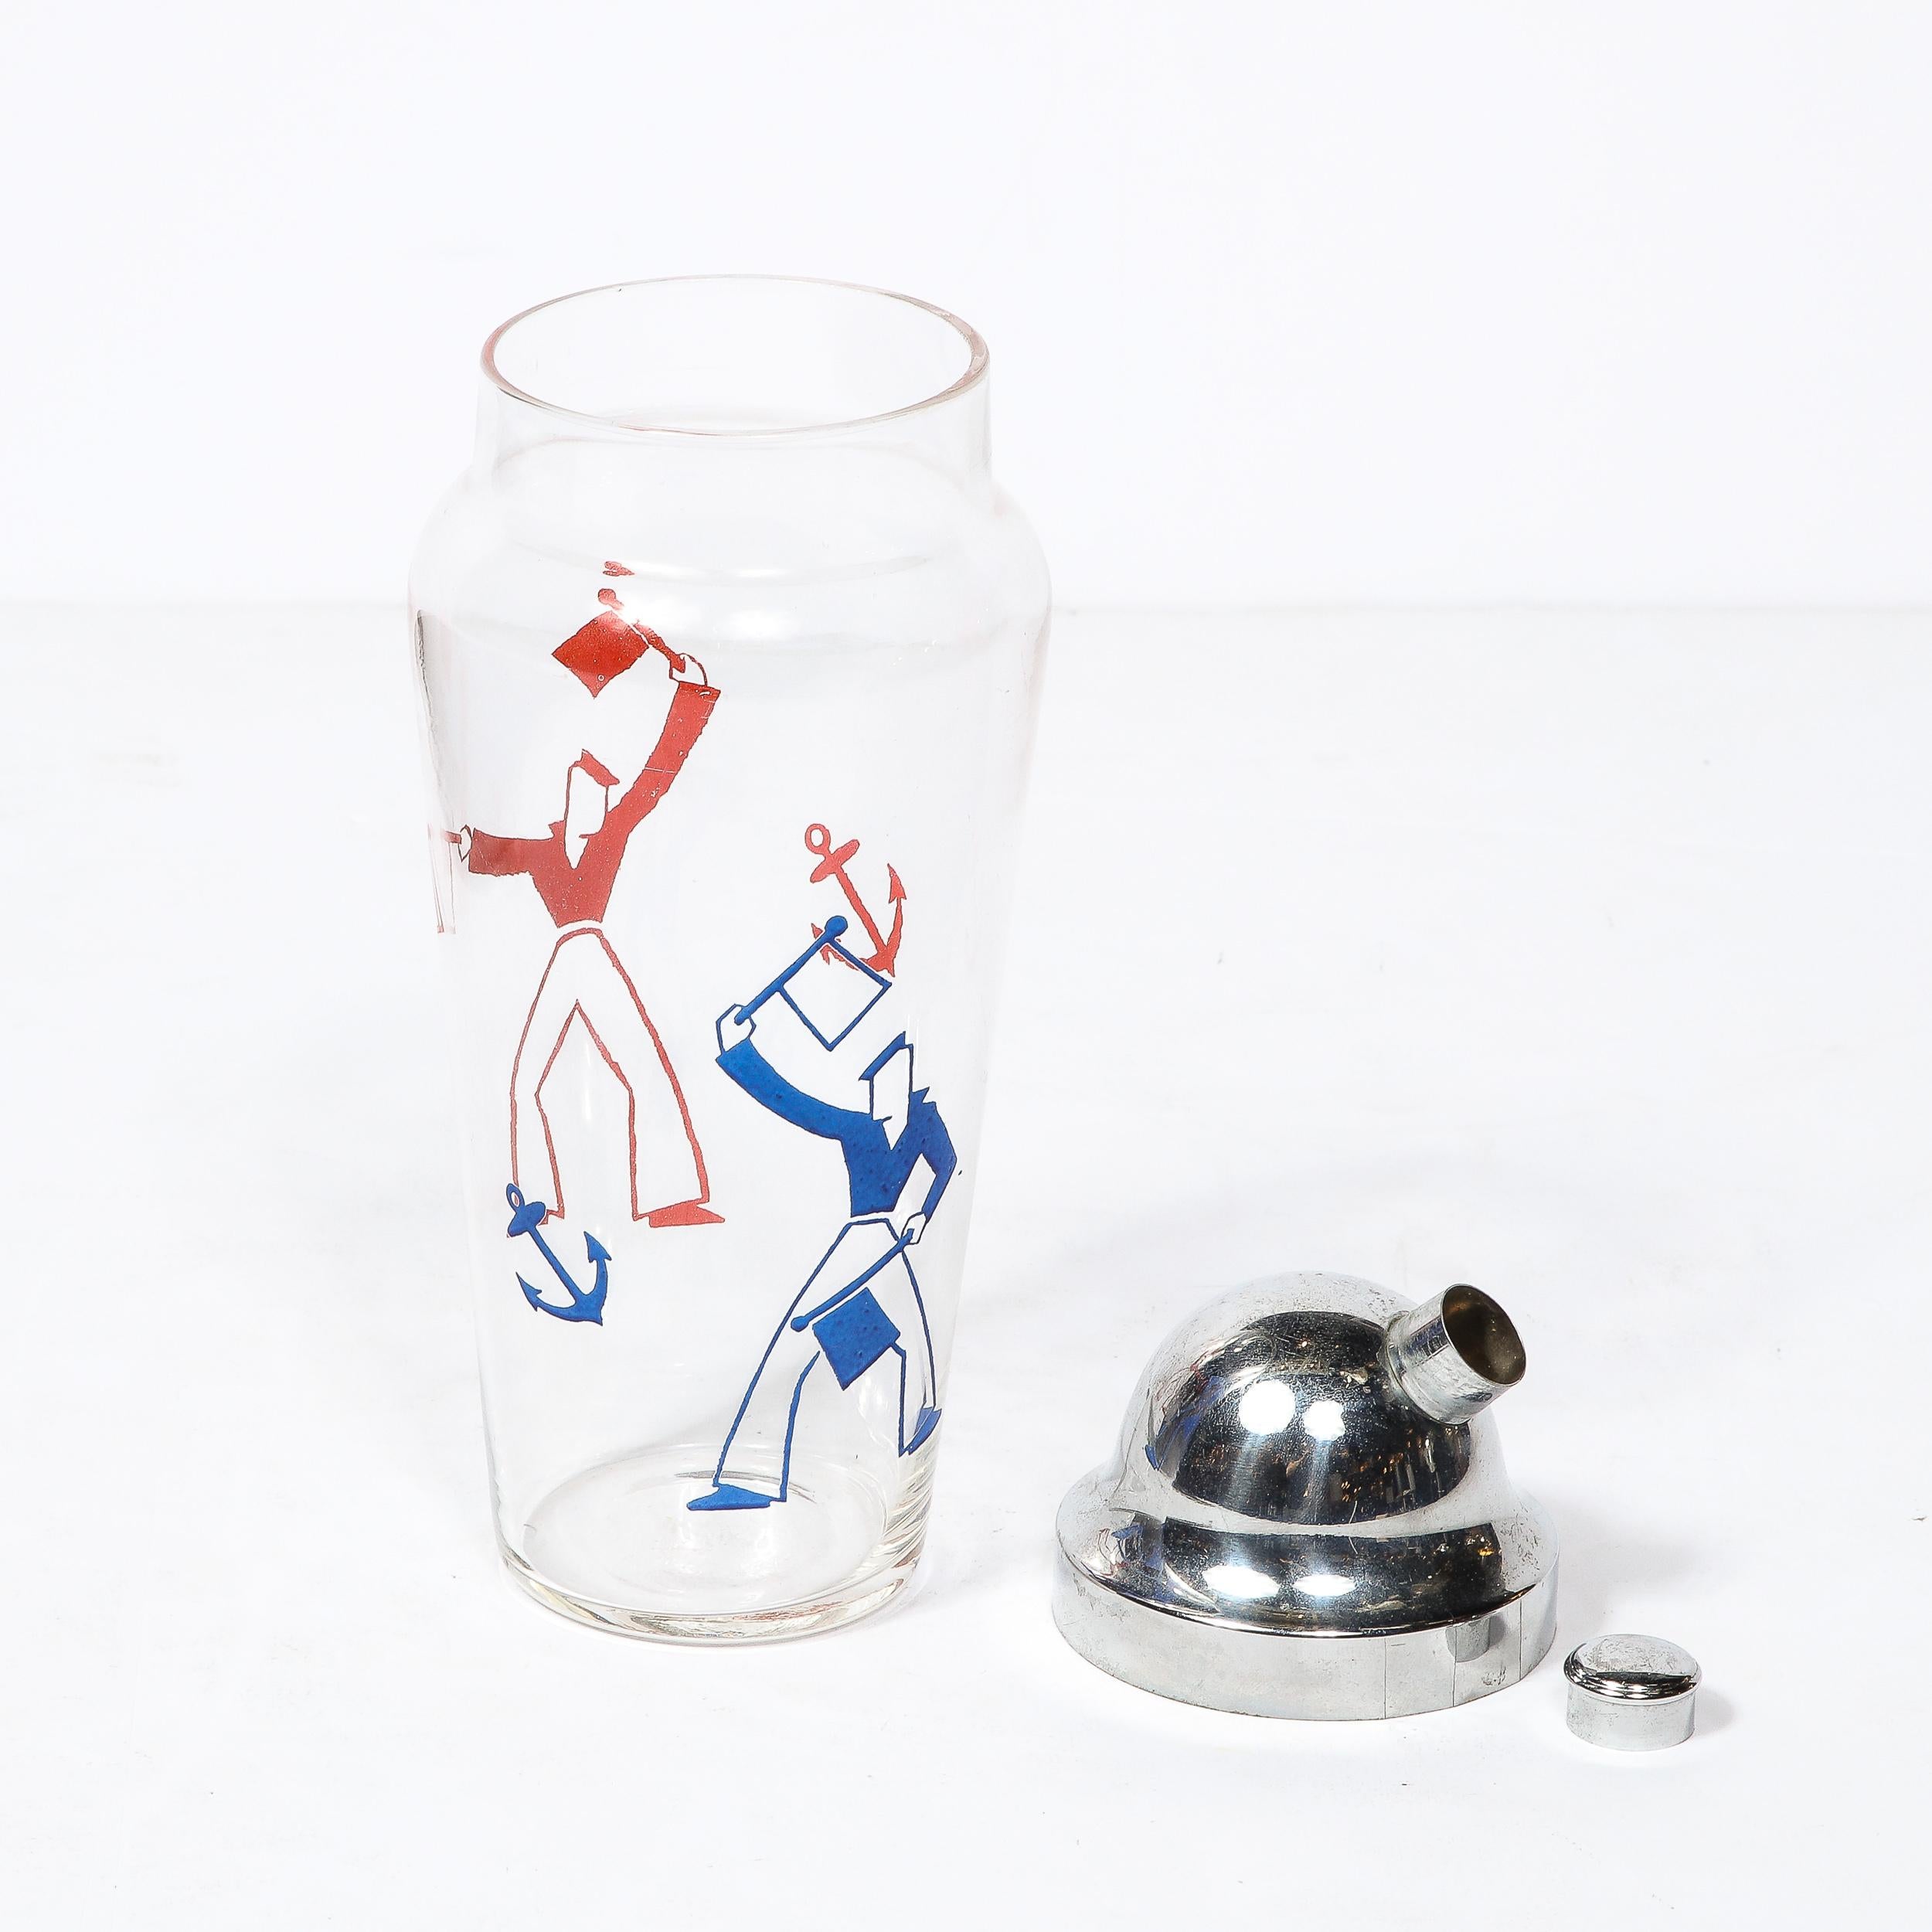 Art Deco Whimsical Cocktail Shaker in Chrome with Sailors in Red and Blue  8